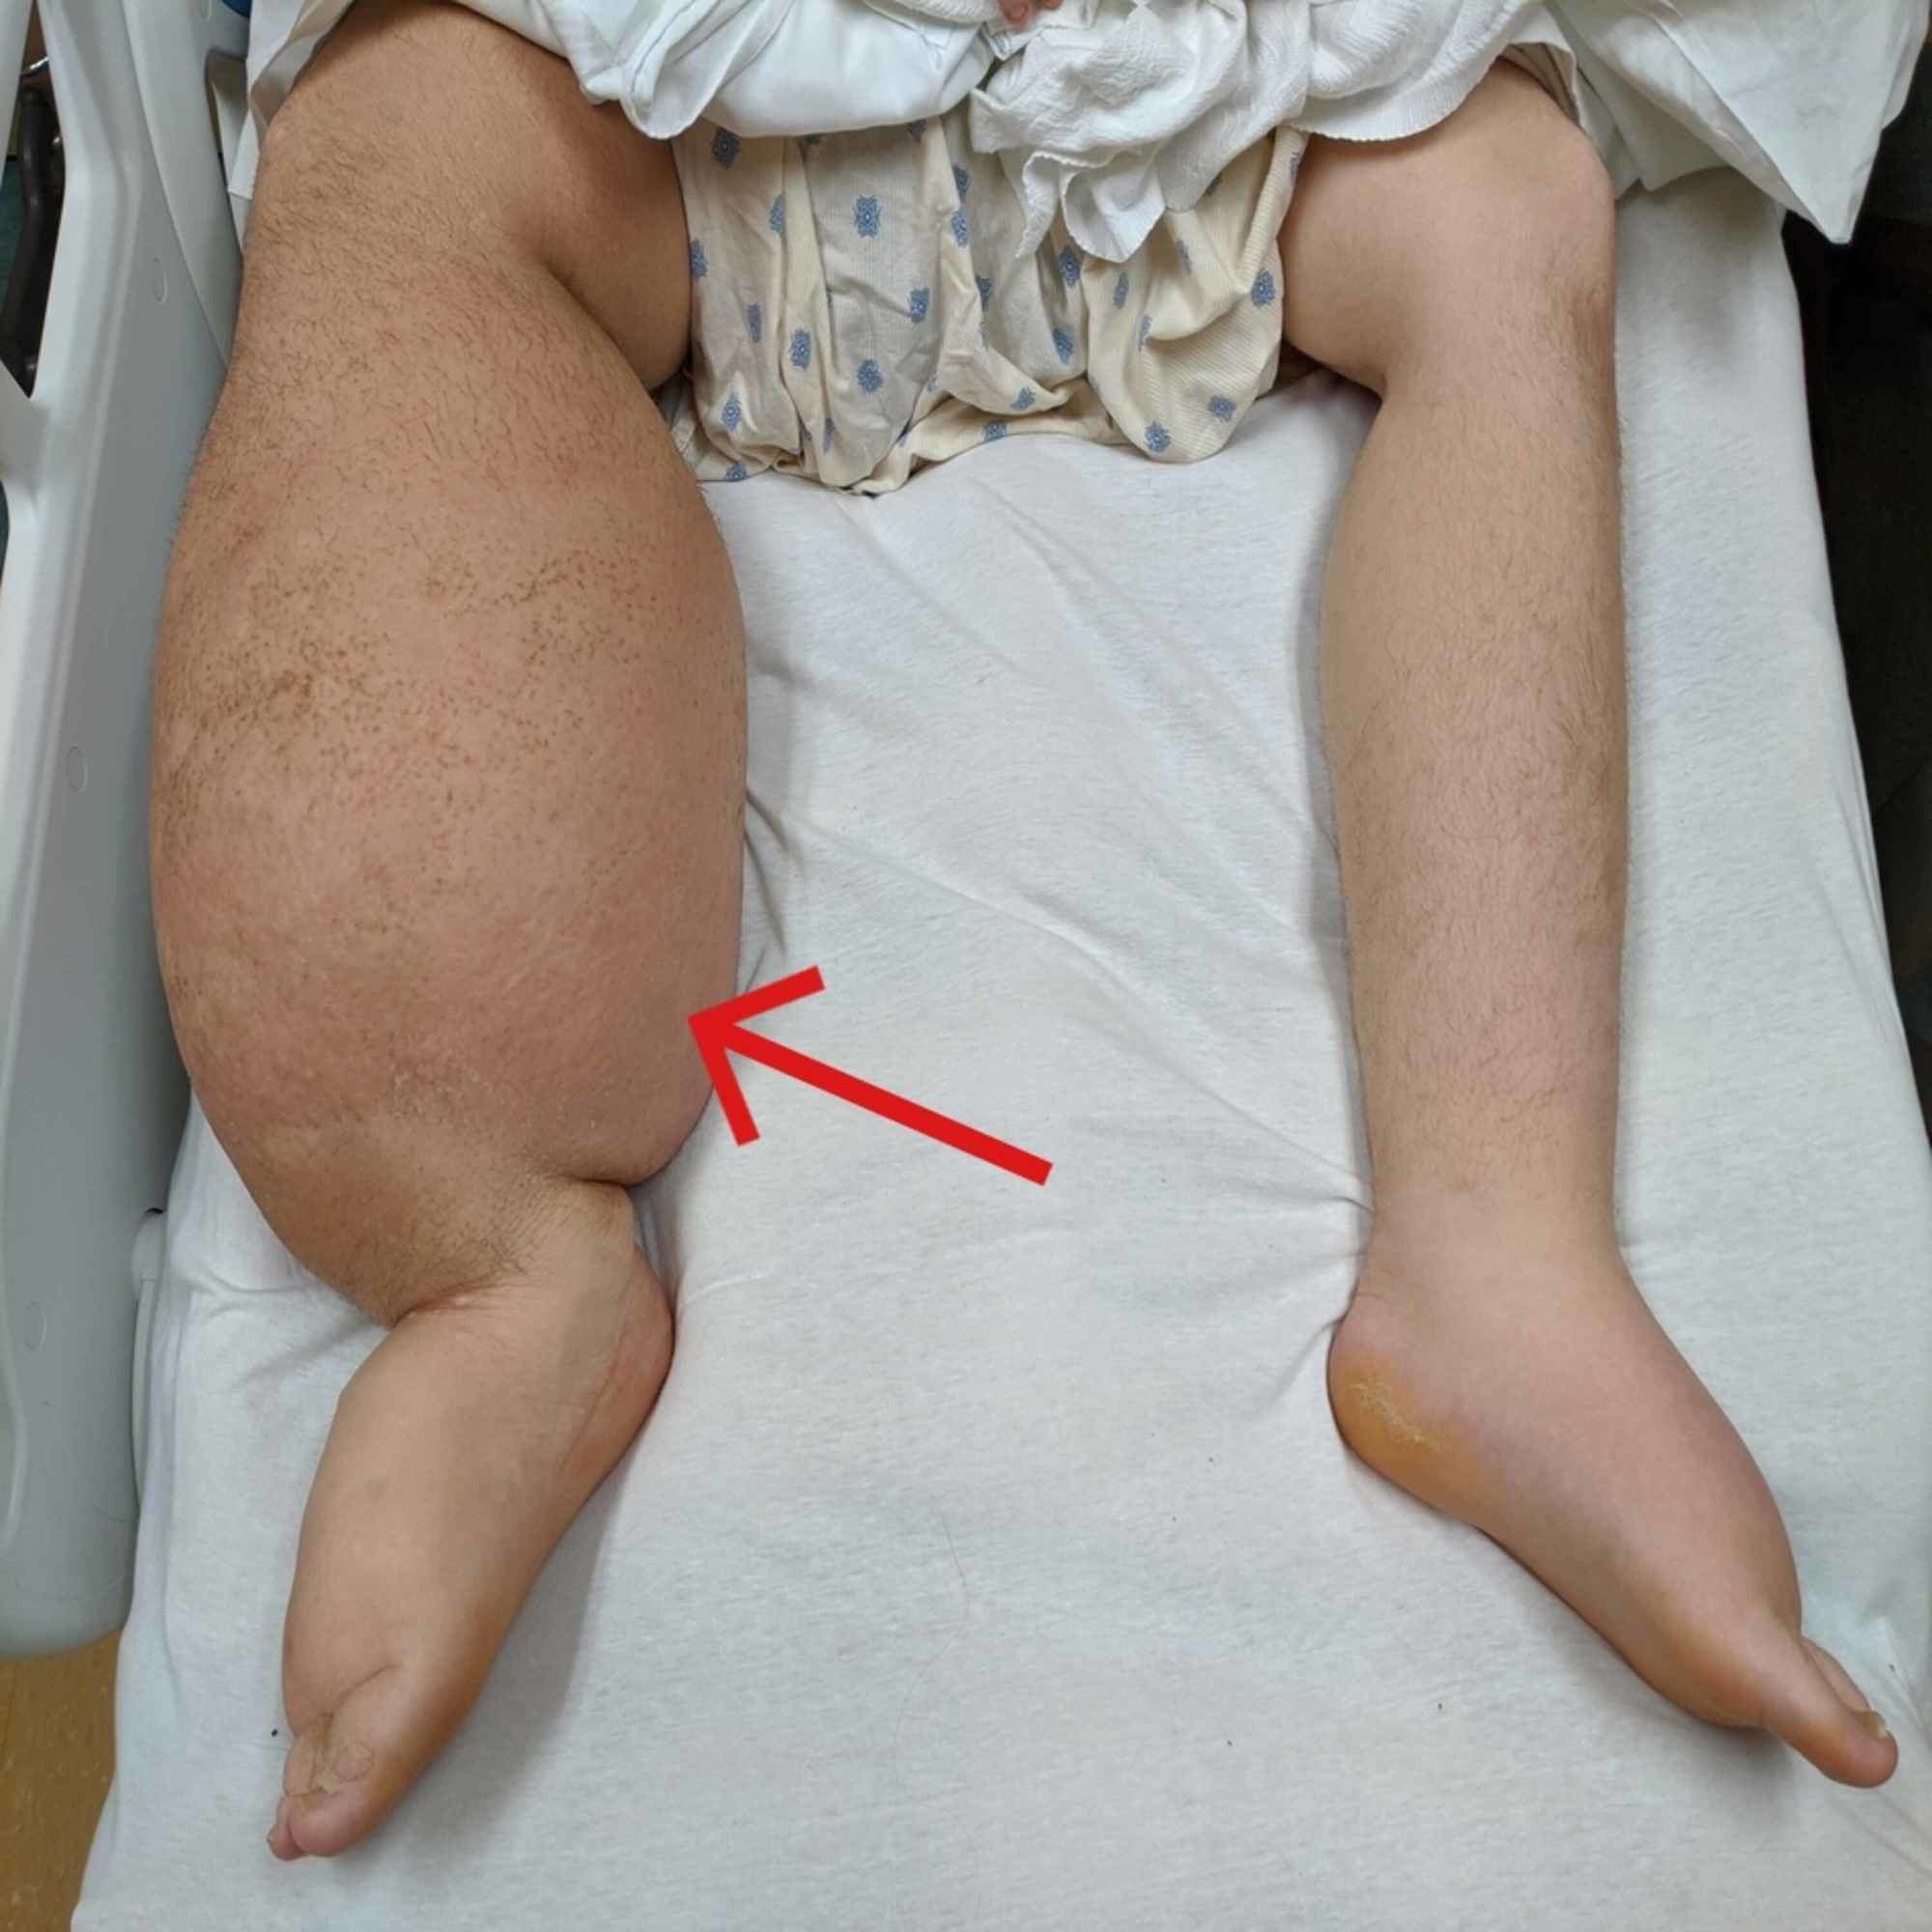 Cureus | A Case of Congenital Lymphedema Complicated by Chronic Chylous